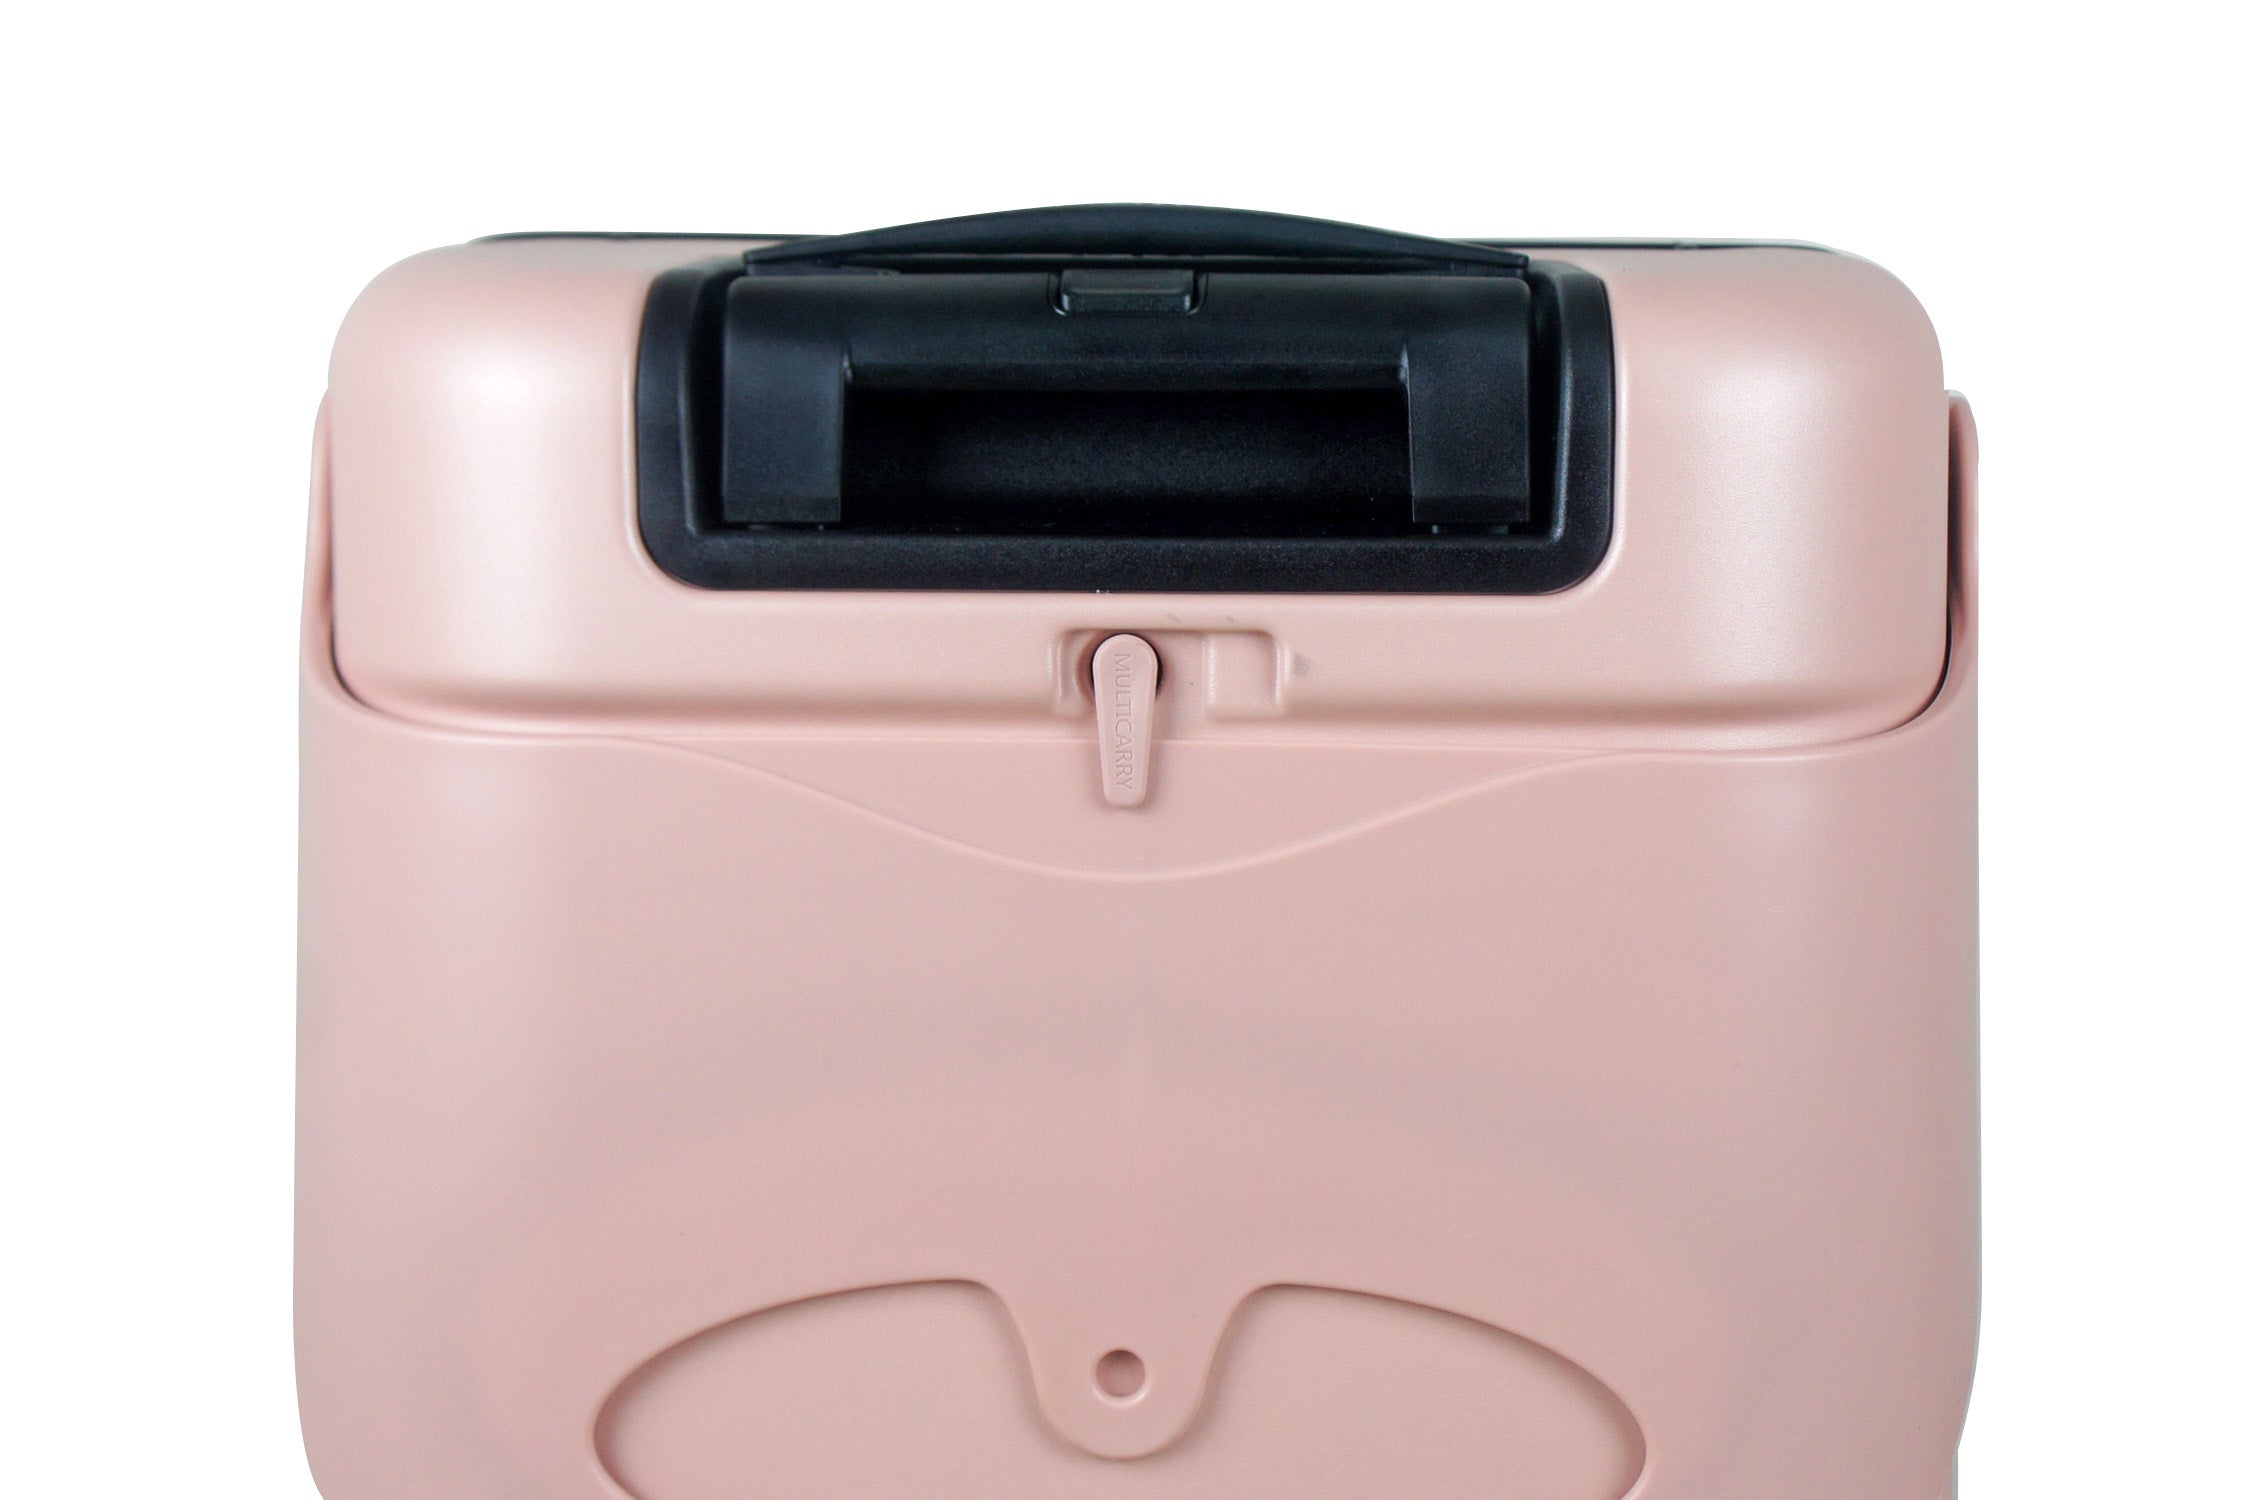 miamily luggage 18 inch dusty pink